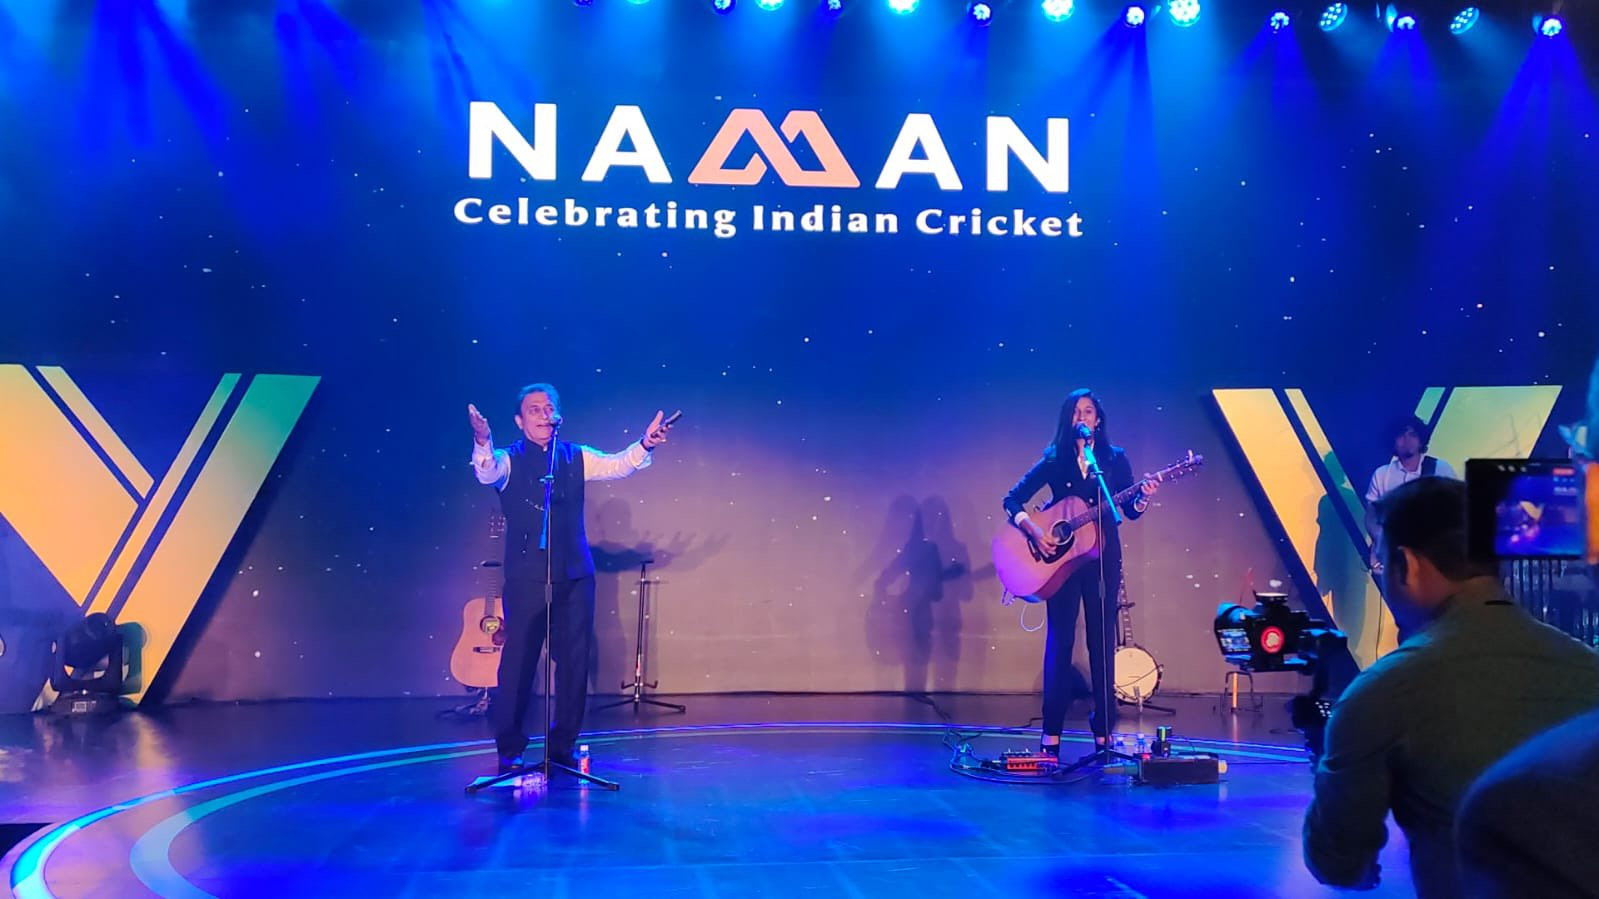 WATCH: Sunil Gavaskar, Jemimah Rodrigues give special musical performance at BCCI’s annual awards function